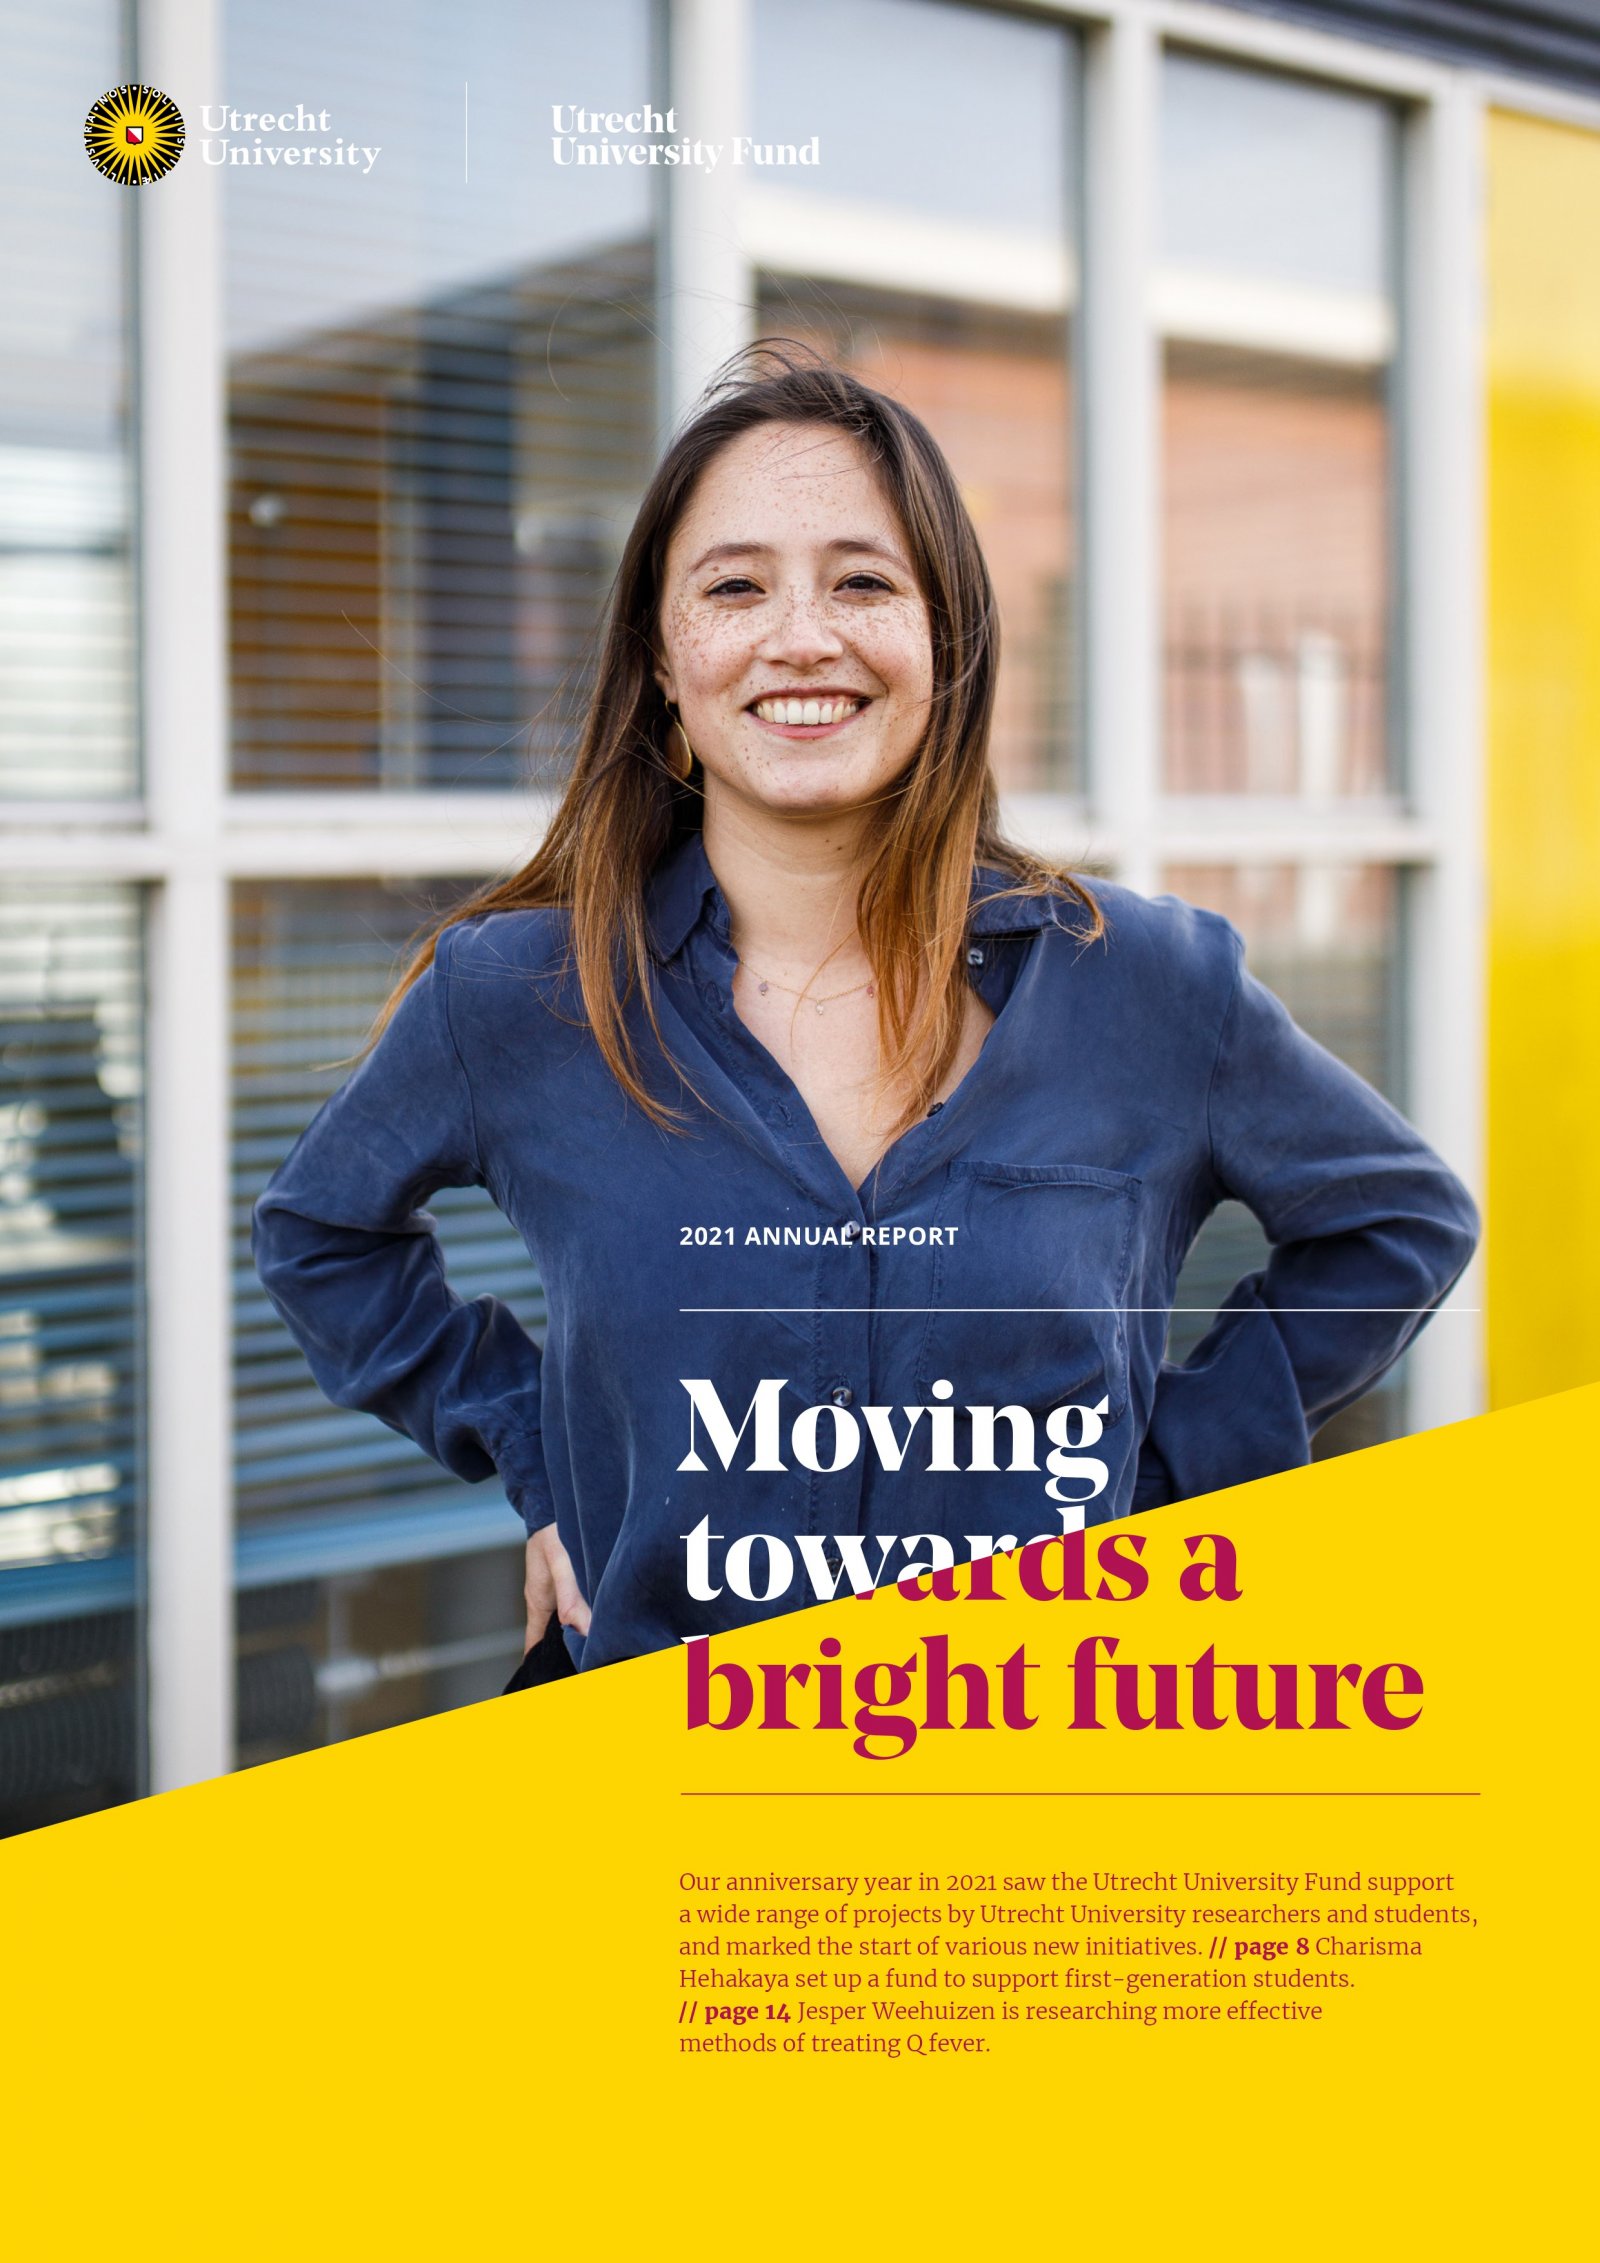 Charisma Hehakaya on the of the Annual Report 2021 of the Utrecht University Fund. The title is 'Moving towards a bright future'.